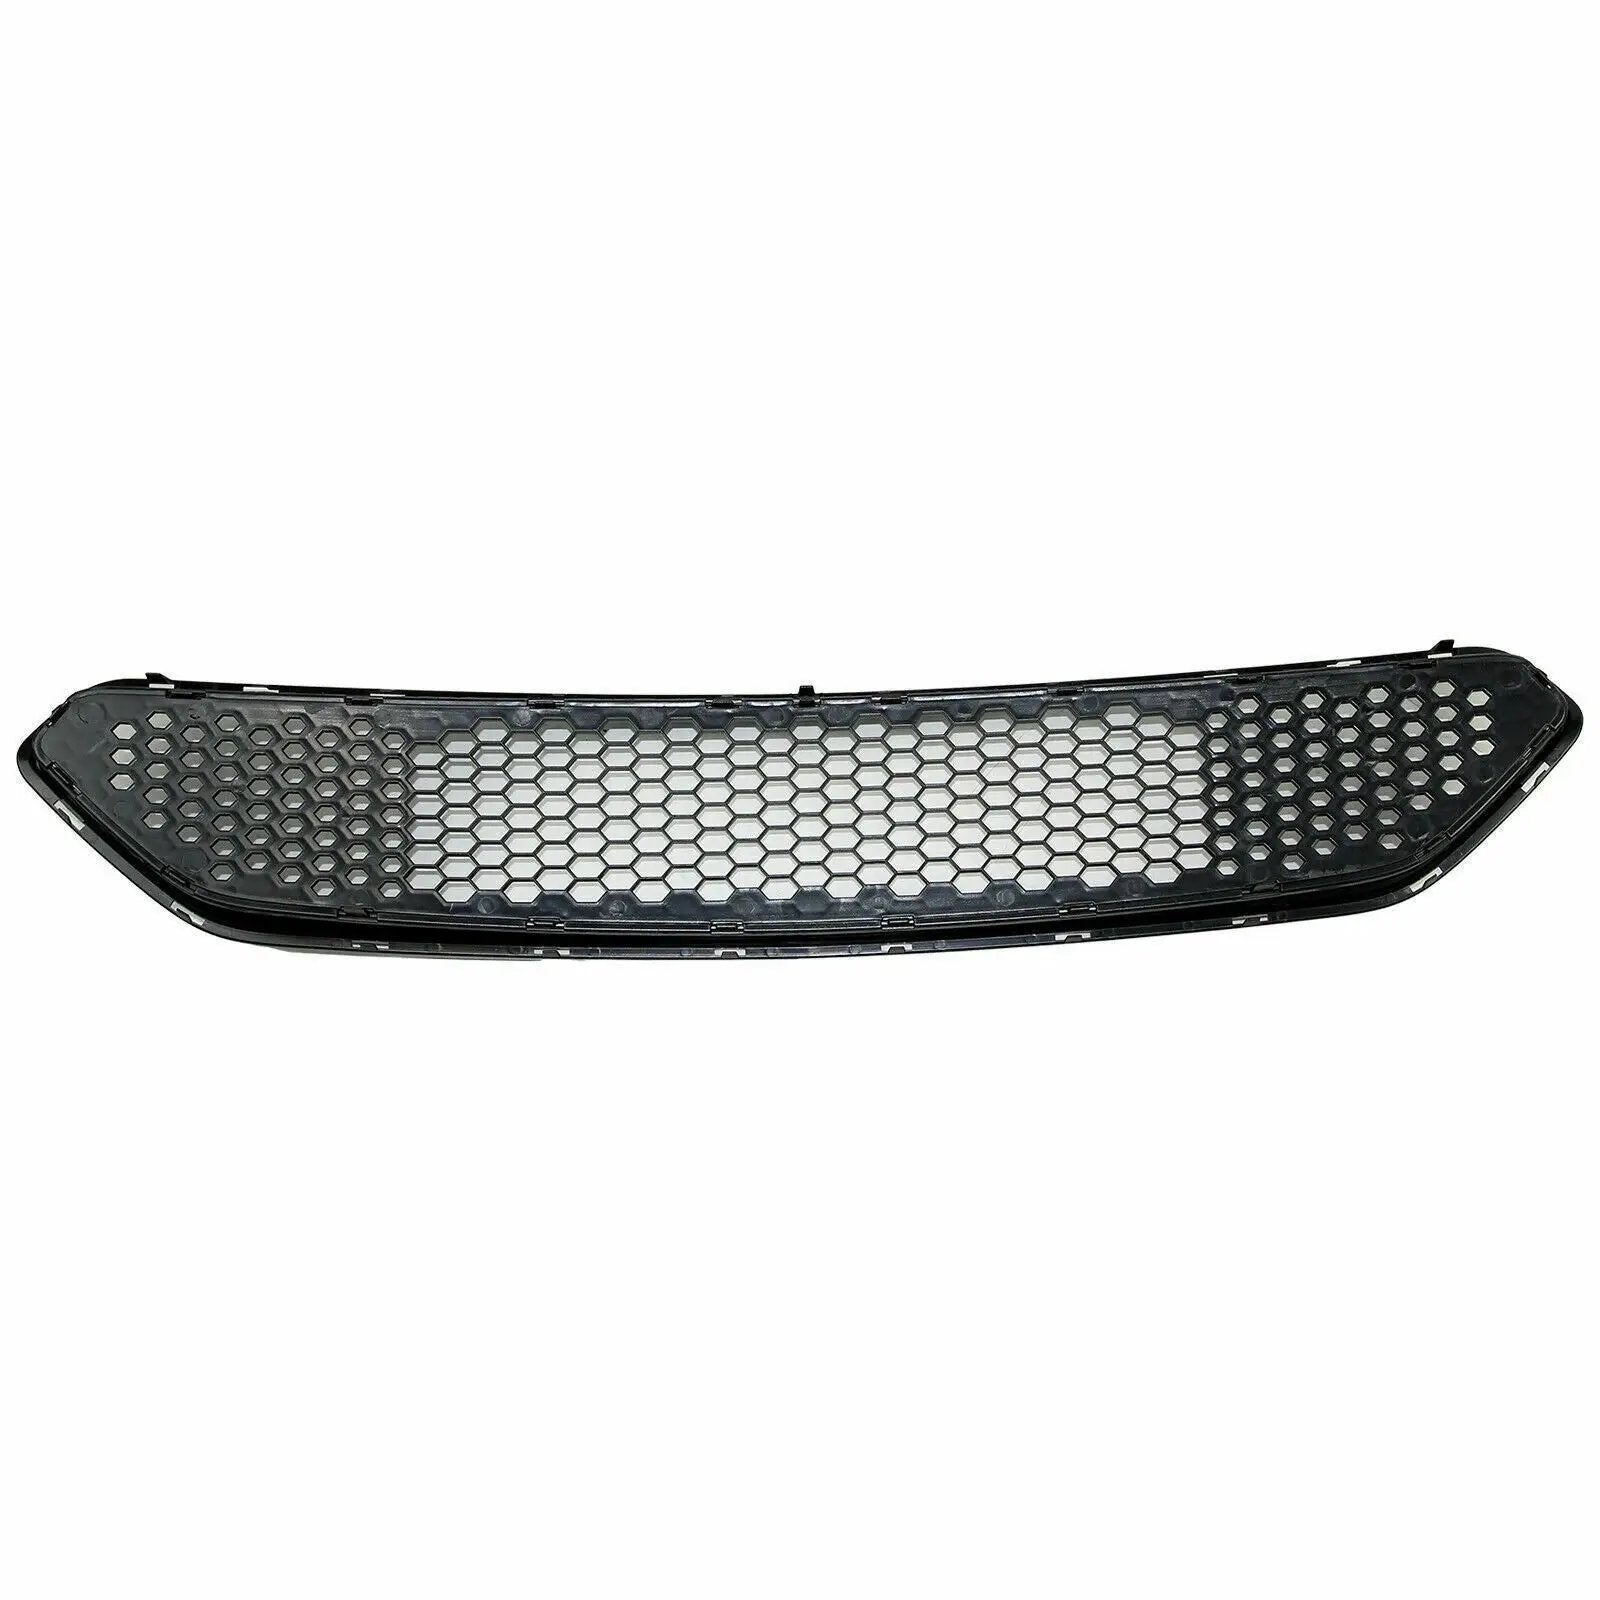 2018 2019 2020 Ford Mustang GT Ecoboost Front Grille Grill Matte Black